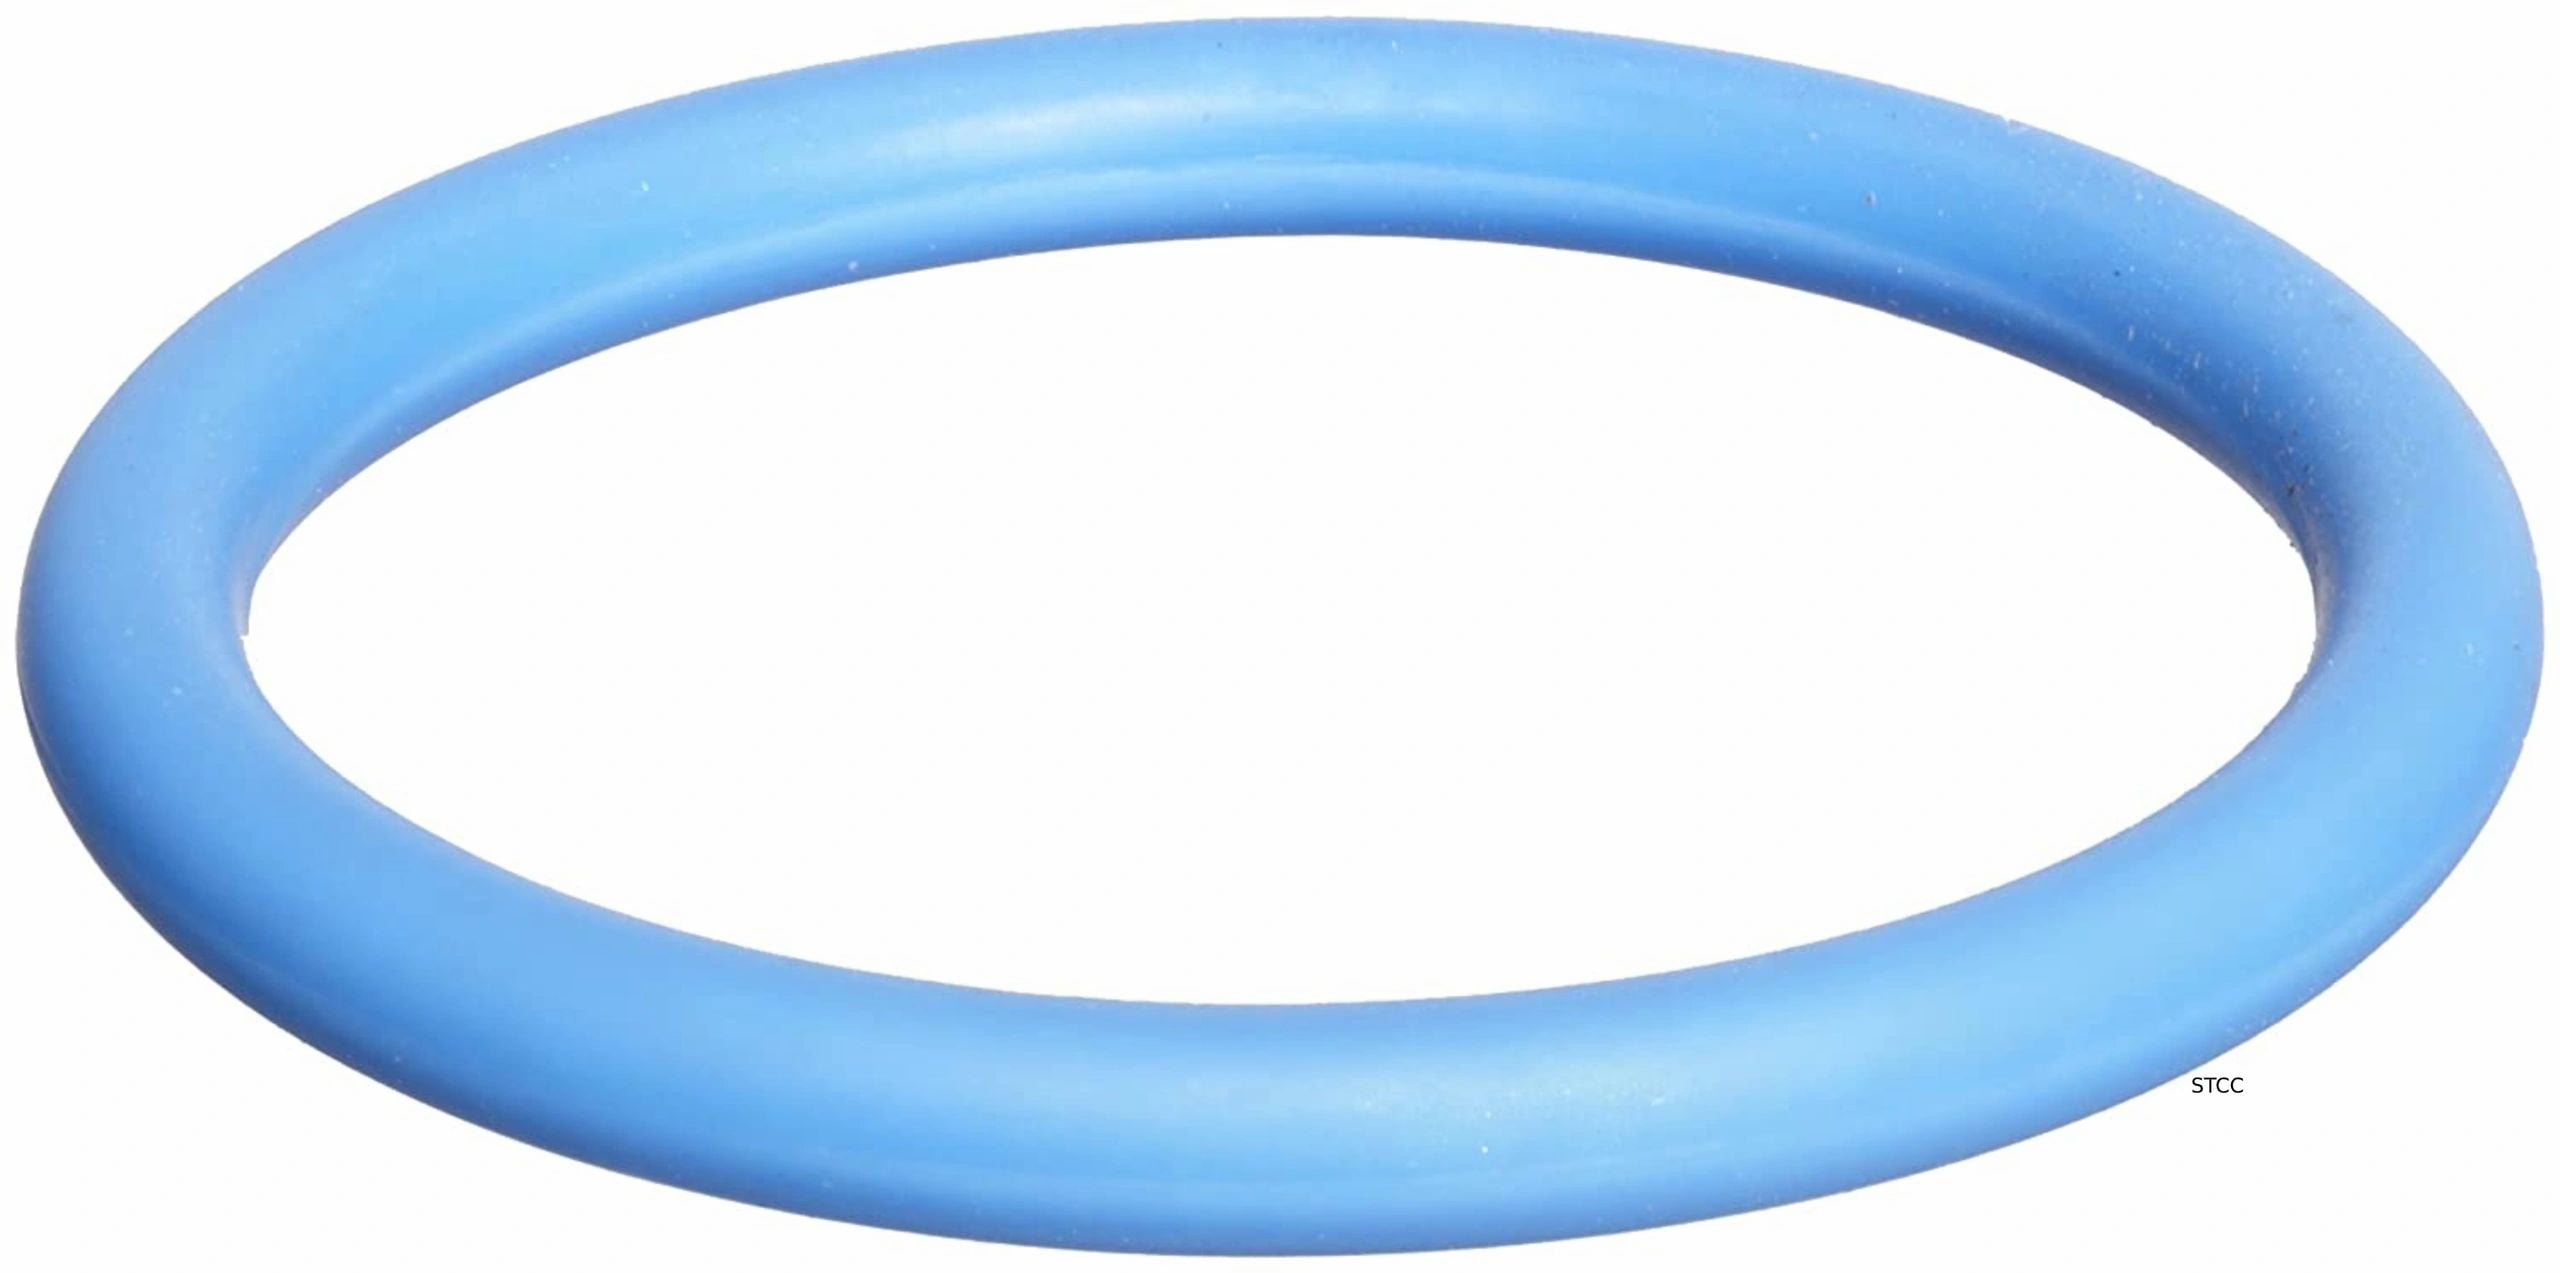 Pack of 25 3/32 Width 129 Fluorosilicone O-Ring 1-9/16 ID Blue 70A Durometer 1-3/4 OD